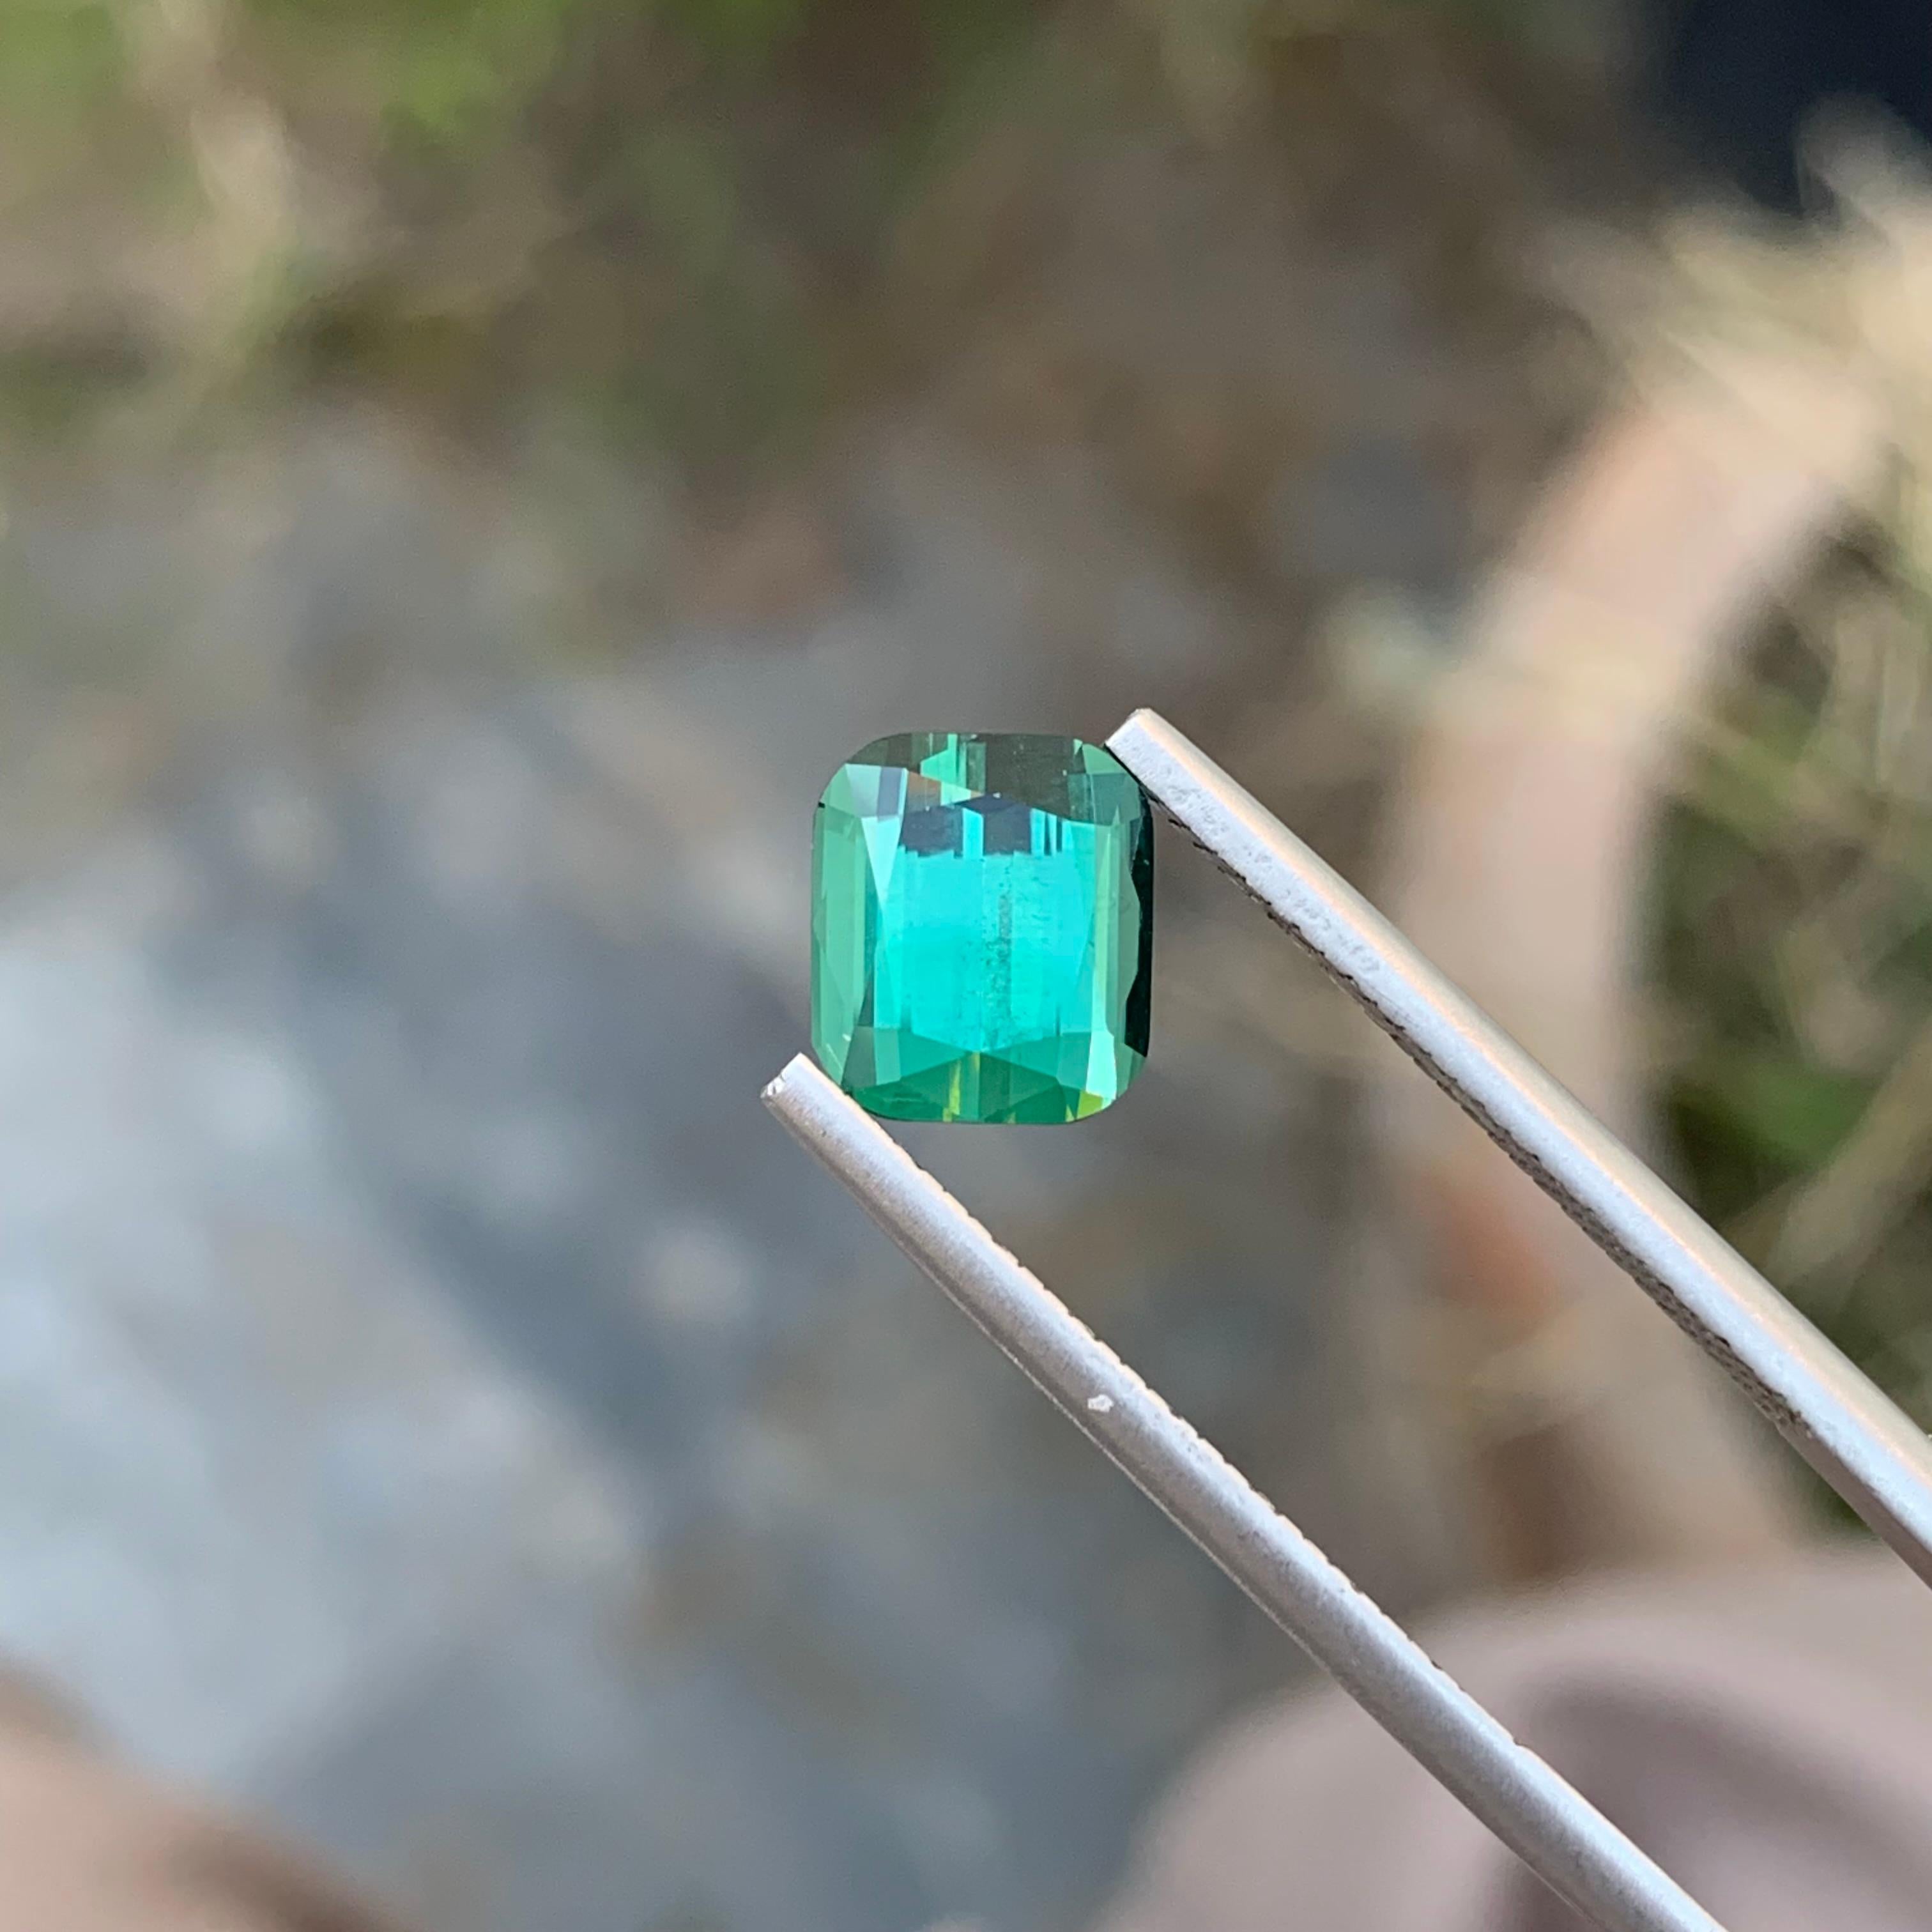 Loose Lagoon Tourmaline

Weight: 3.00 Carats
Dimension: 8.2 x 7.2 x 5.9 Mm
Colour: Lagoon
Origin: Afghanistan
Certificate: On Demand
Treatment: Non

Tourmaline is a captivating gemstone known for its remarkable variety of colors, making it a